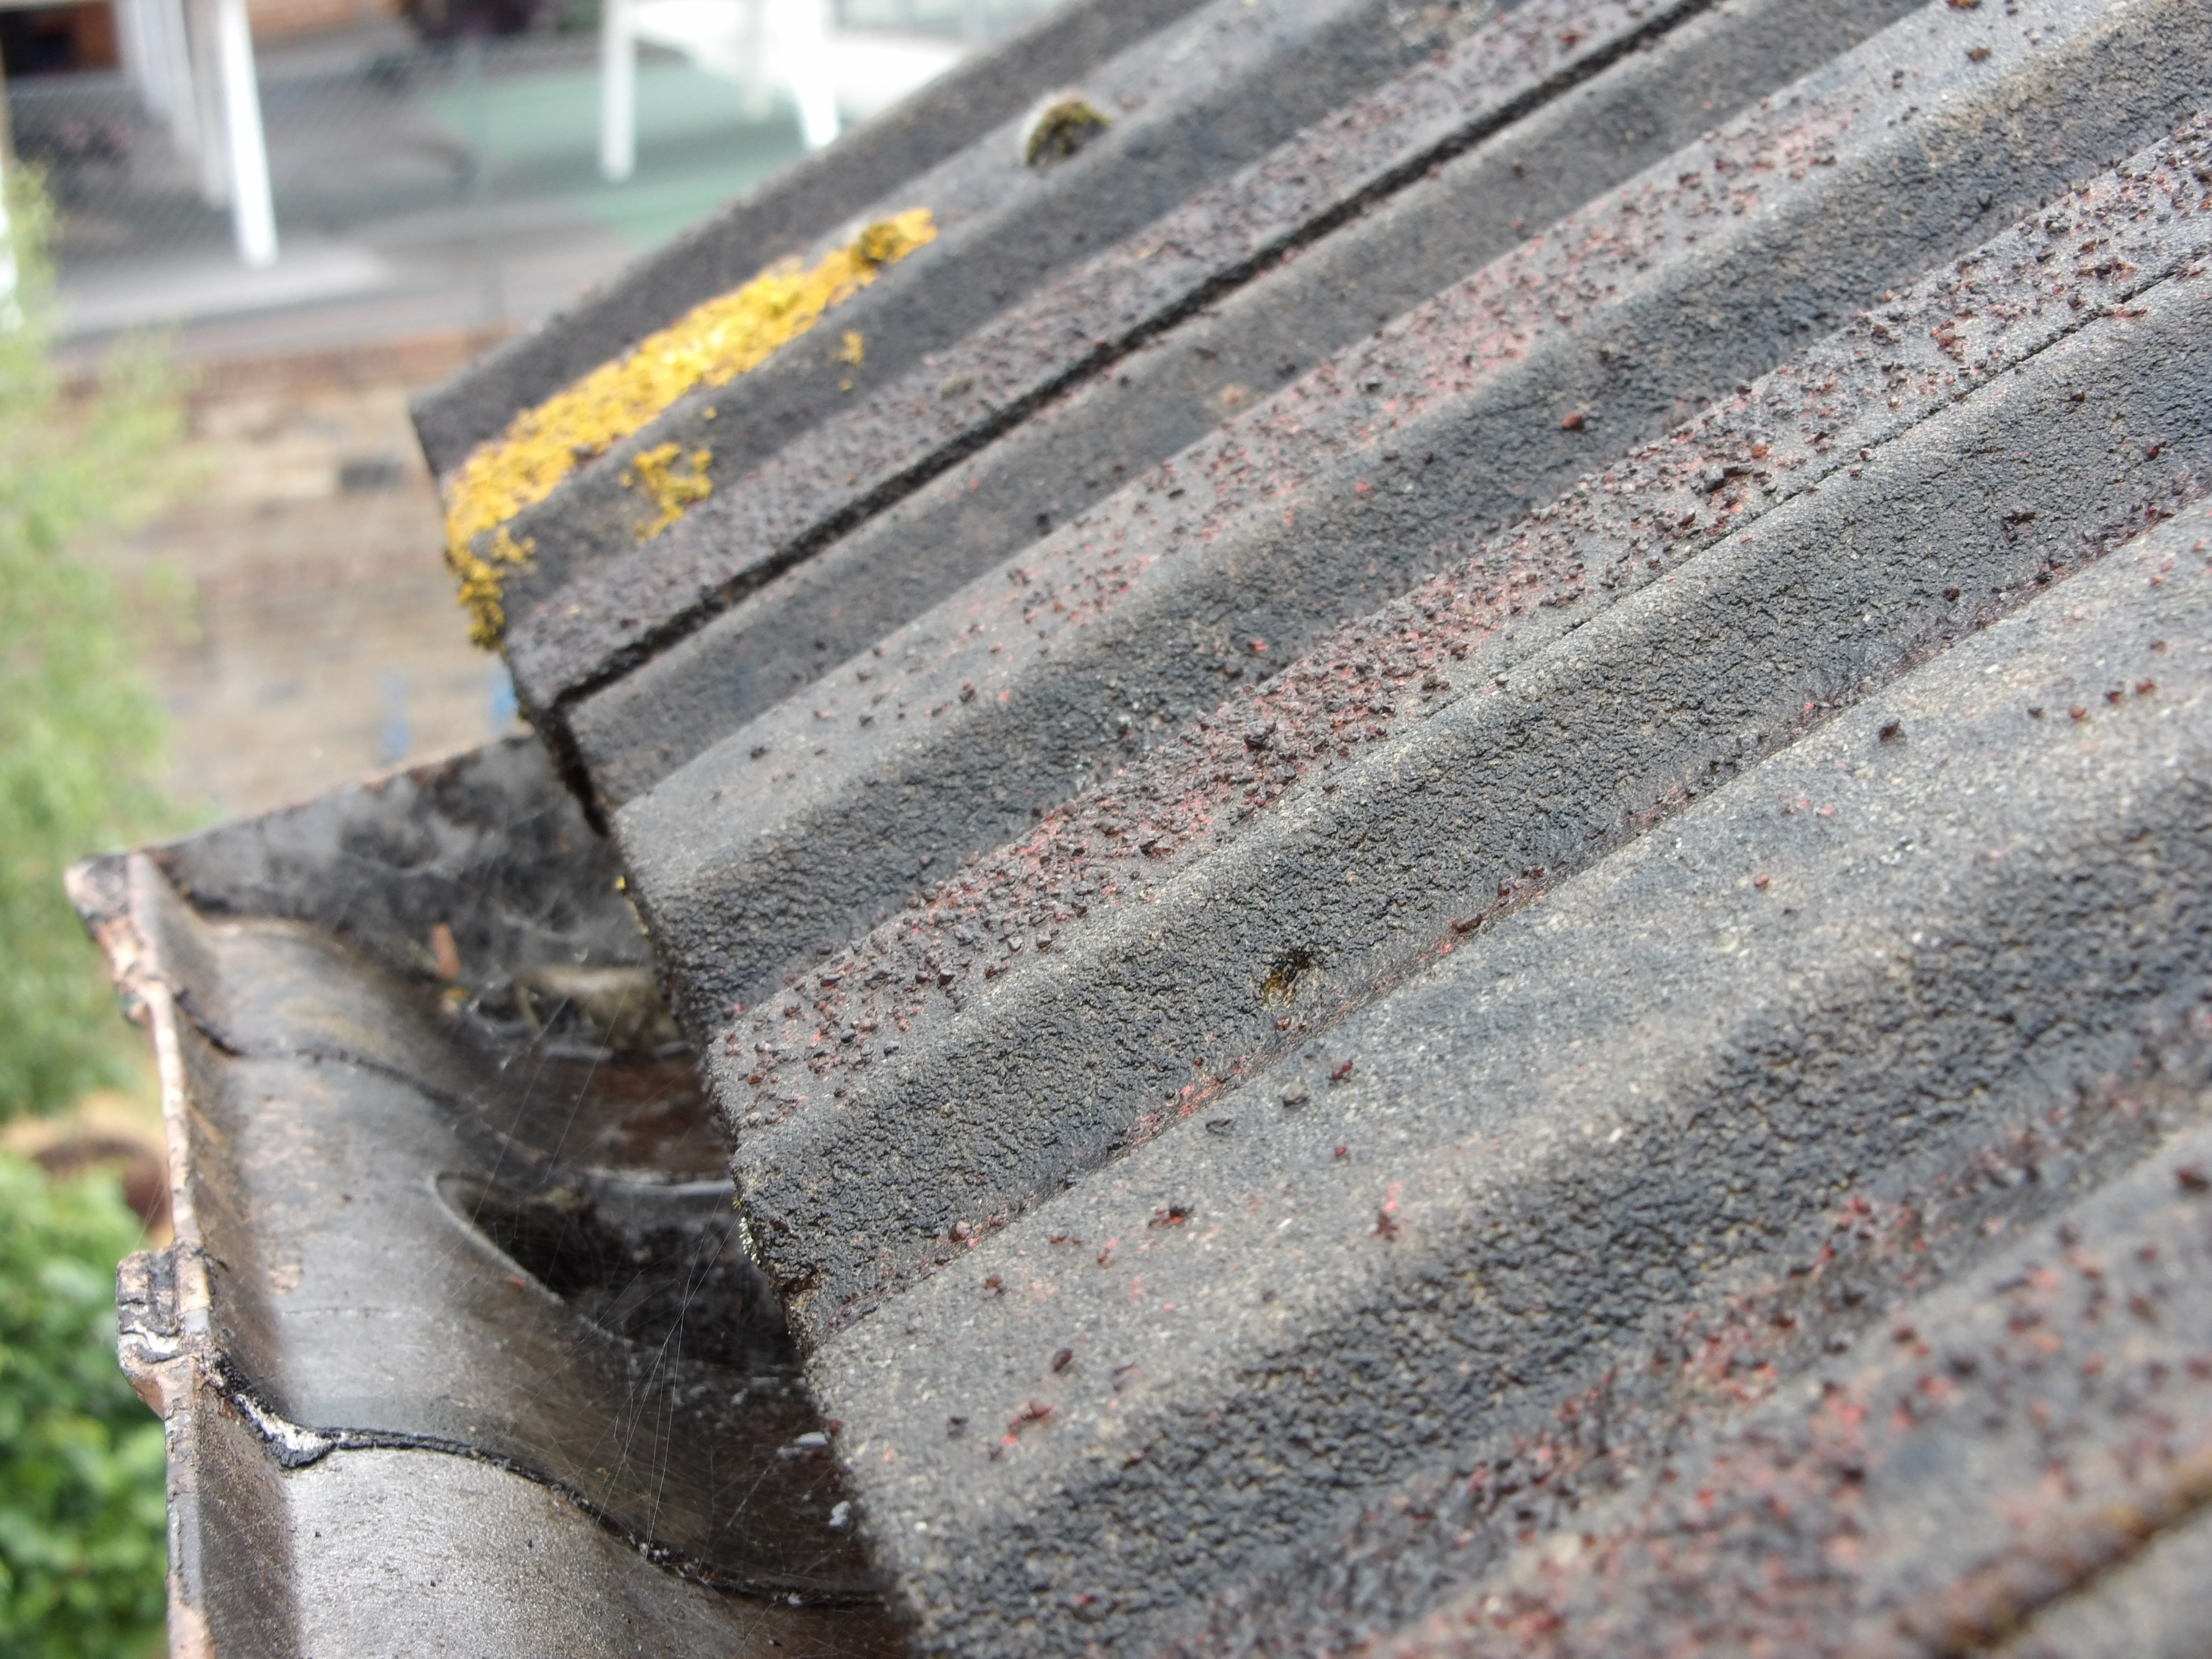 Telescopic camera inspection - roof tiles